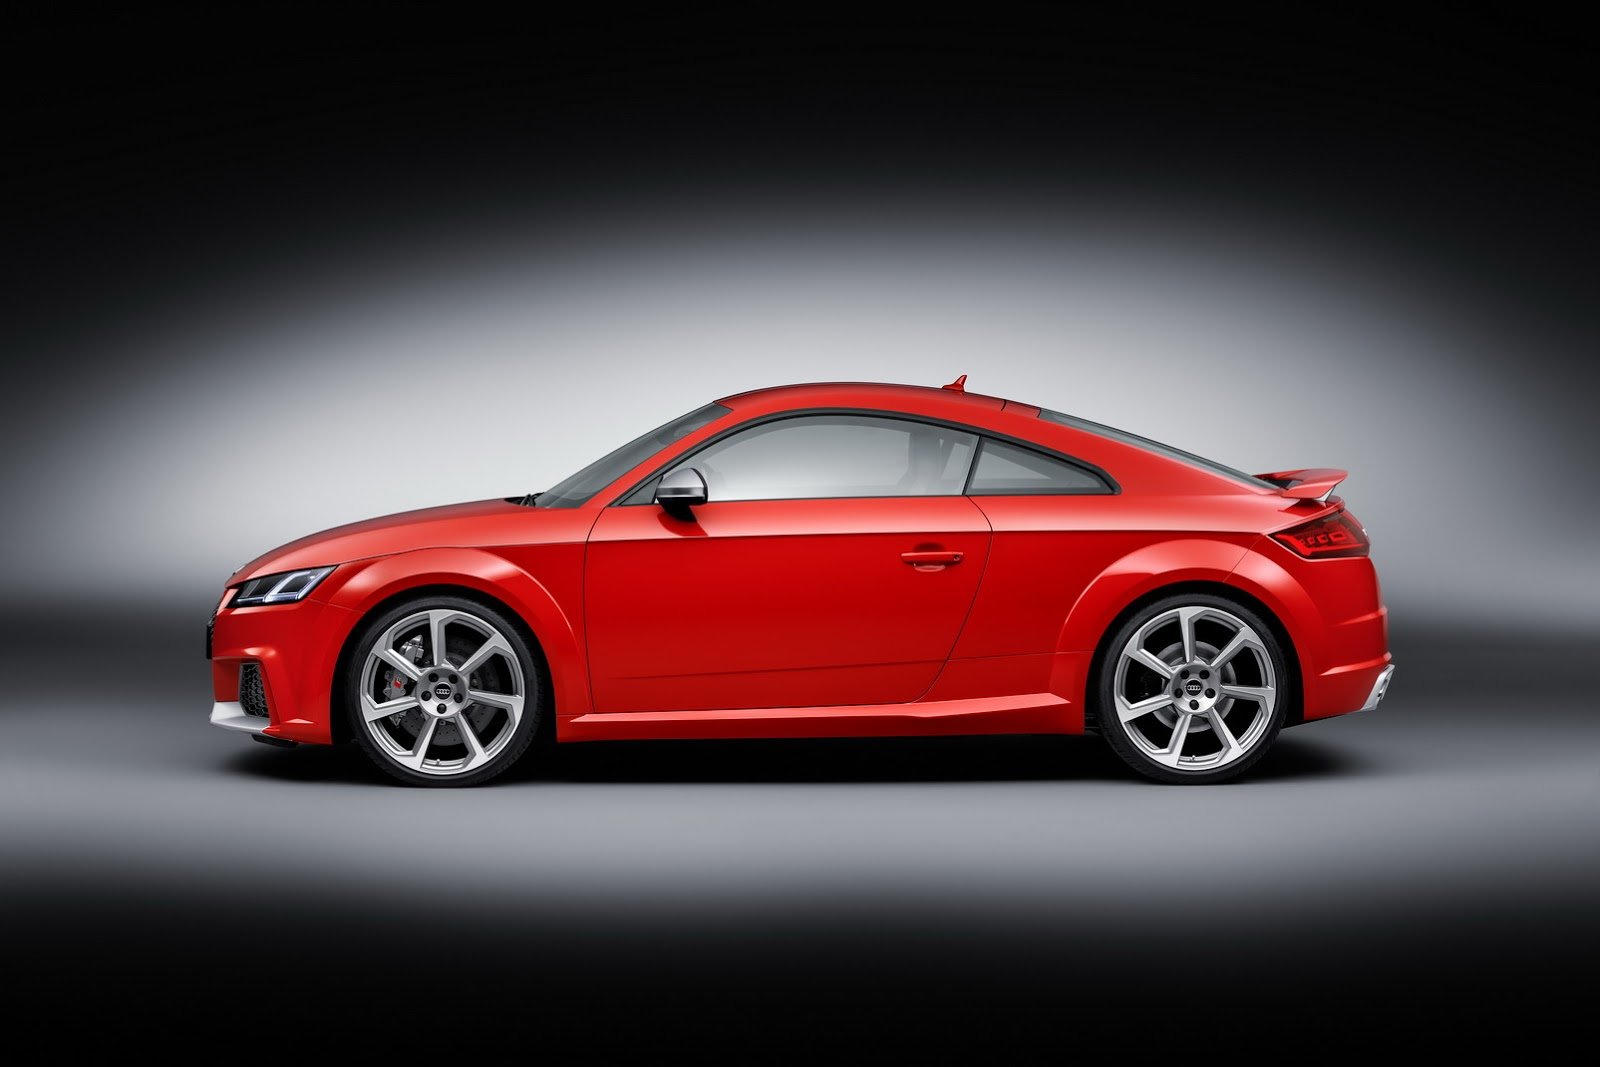 2016, Audi, Tt, Rs, Roadster, Coupe, Cars, Red Wallpaper